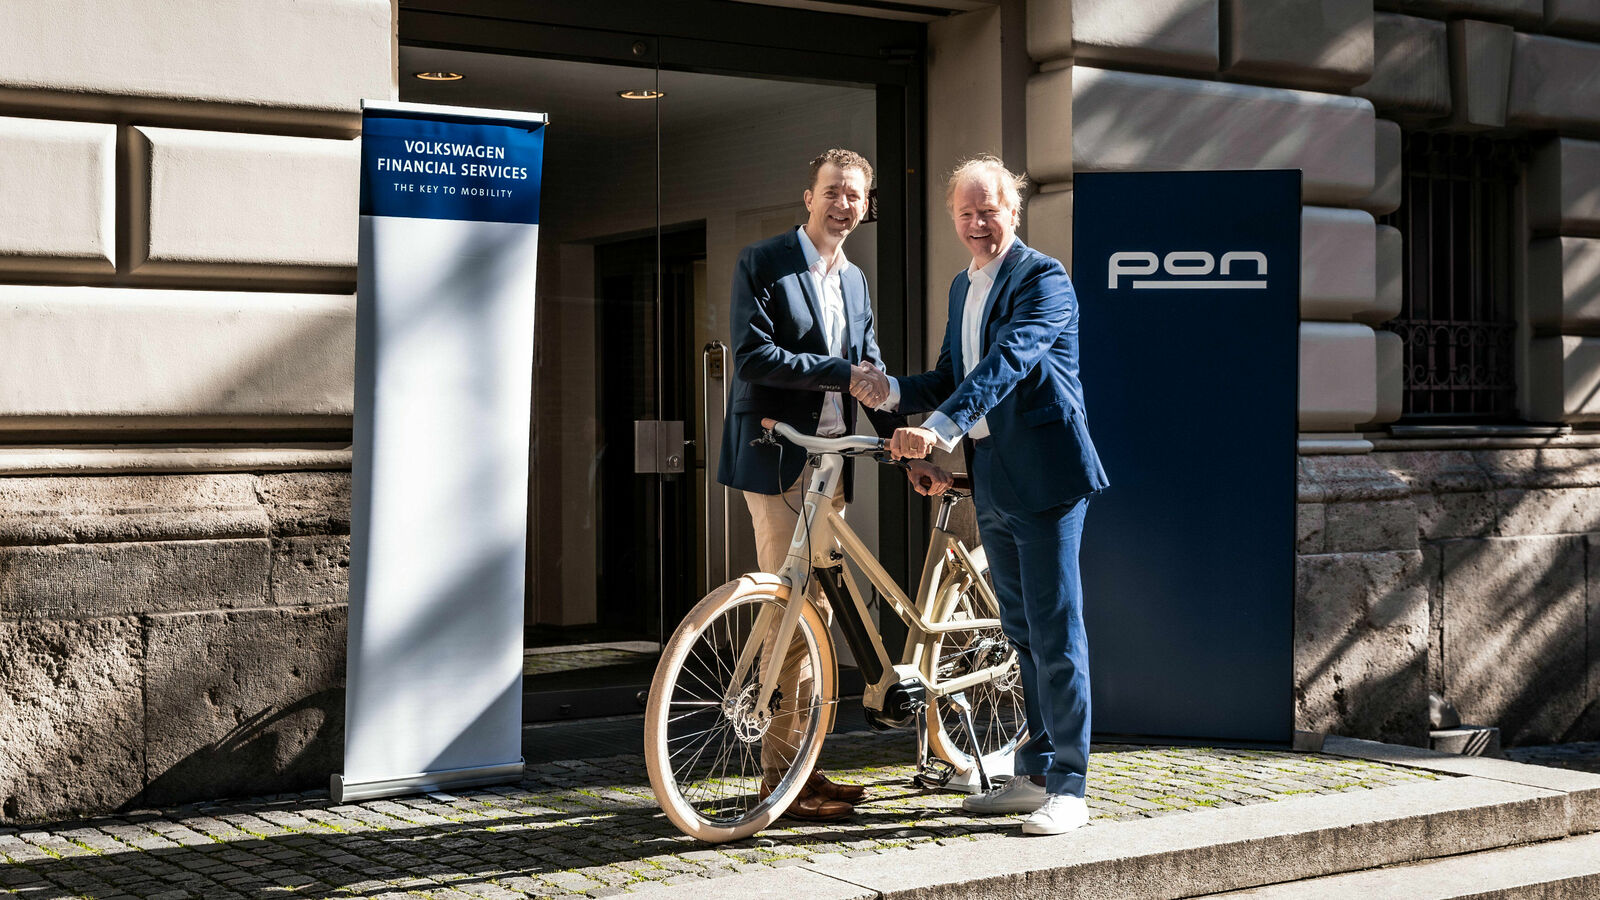 Dr. Christian Dahlheim (left), CEO of Volkswagen Financial Services AG, and Janus Smalbraak (right), CEO of Pon Holdings, stand together in front of a bicycle and shake hands.